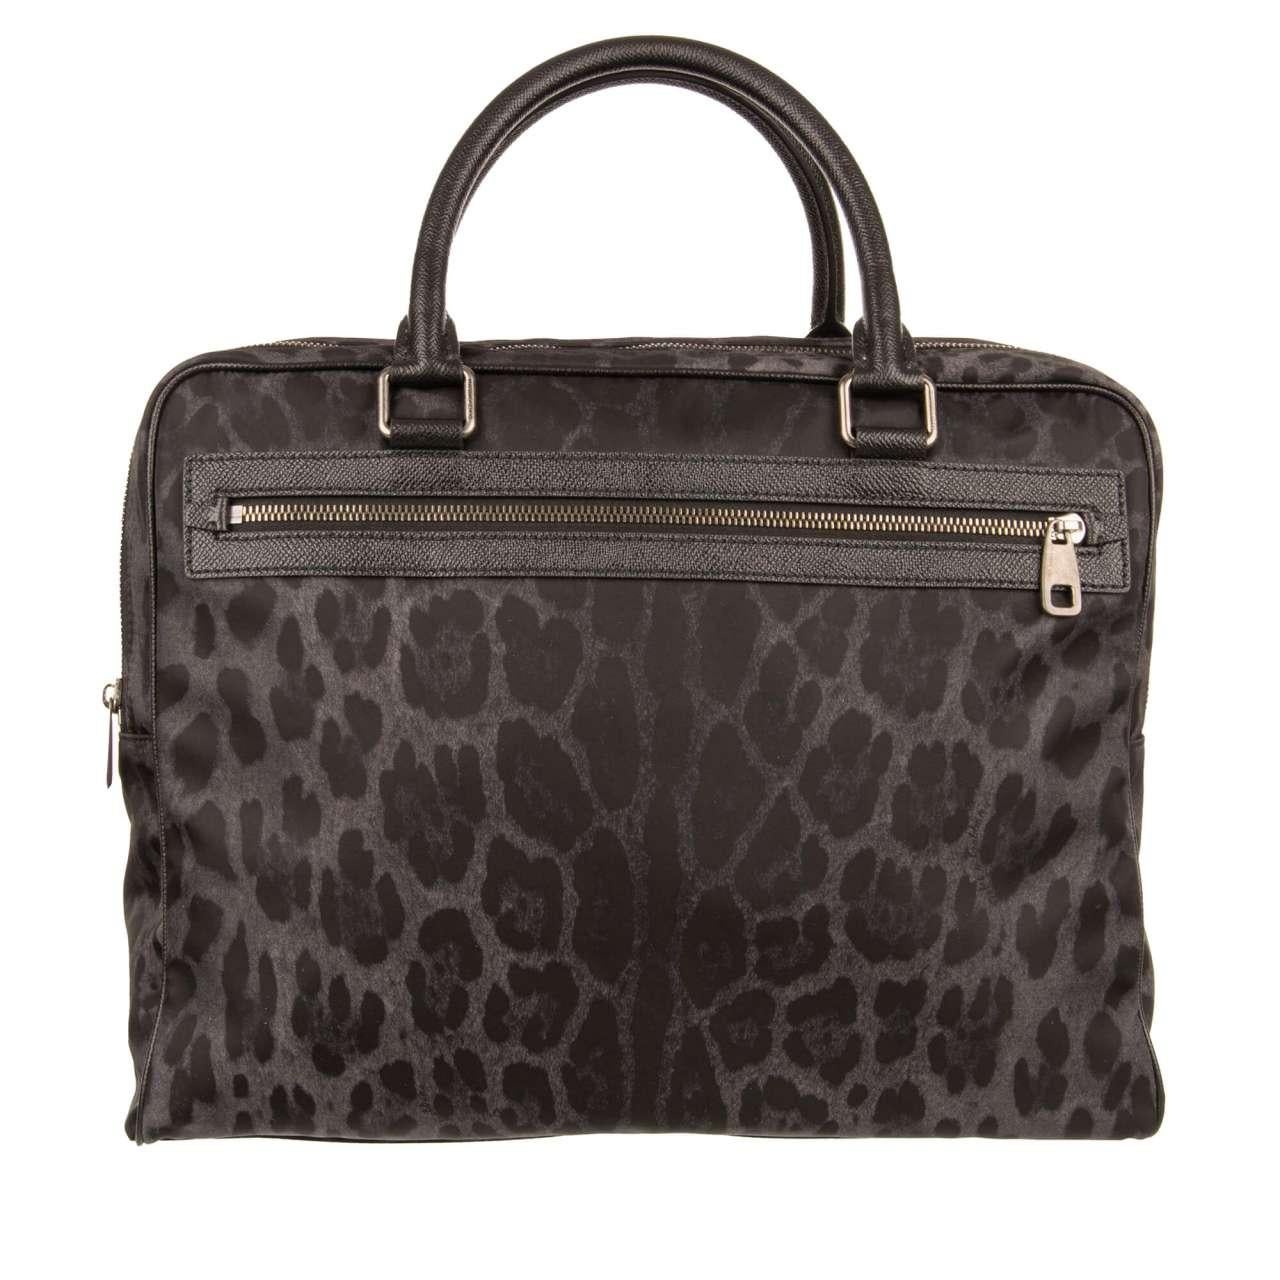 - Leopard Printed Briefcase Bag / Business Bag made of nylon with leather details, logo print, two dividers and pockets by DOLCE & GABBANA - New with Tag, Dustbag and Authenticity Card - MADE IN ITALY - Former RRP: EUR 995 - Detachable / Adjustable